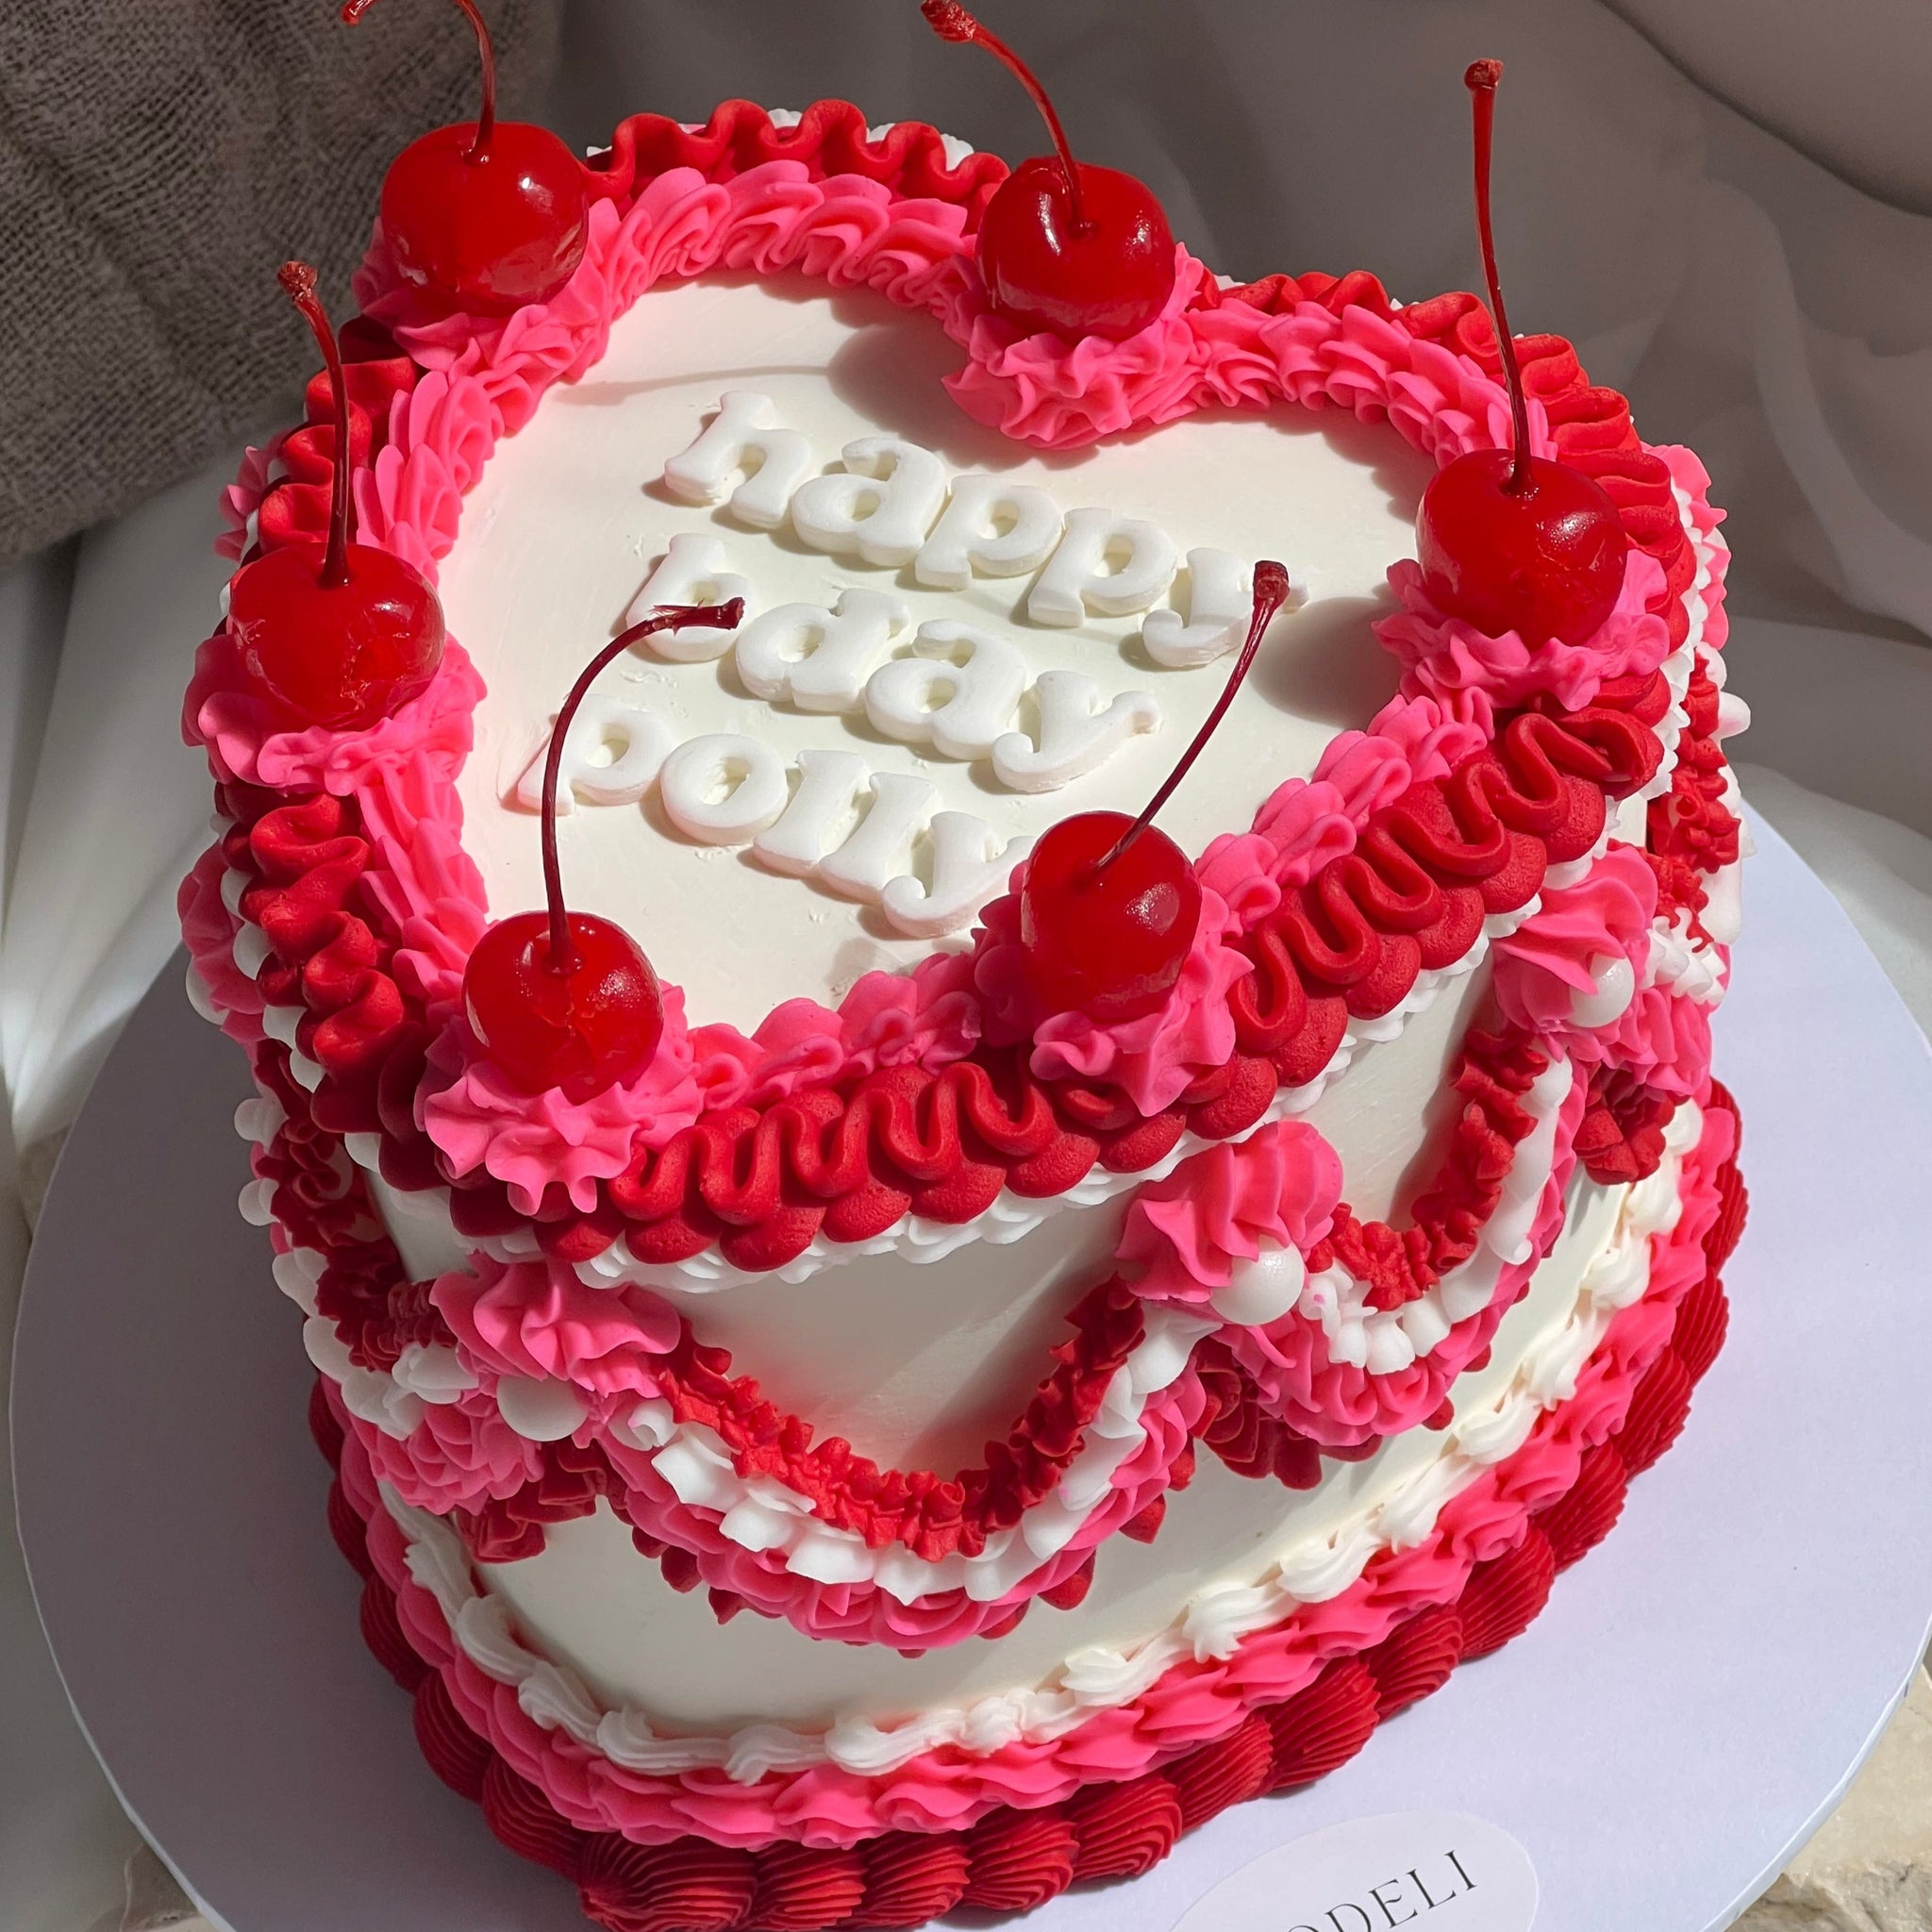 Celebrate Valentine's Day with Heart-Shaped Cakes Designs - Cakes and Bakes  Stories